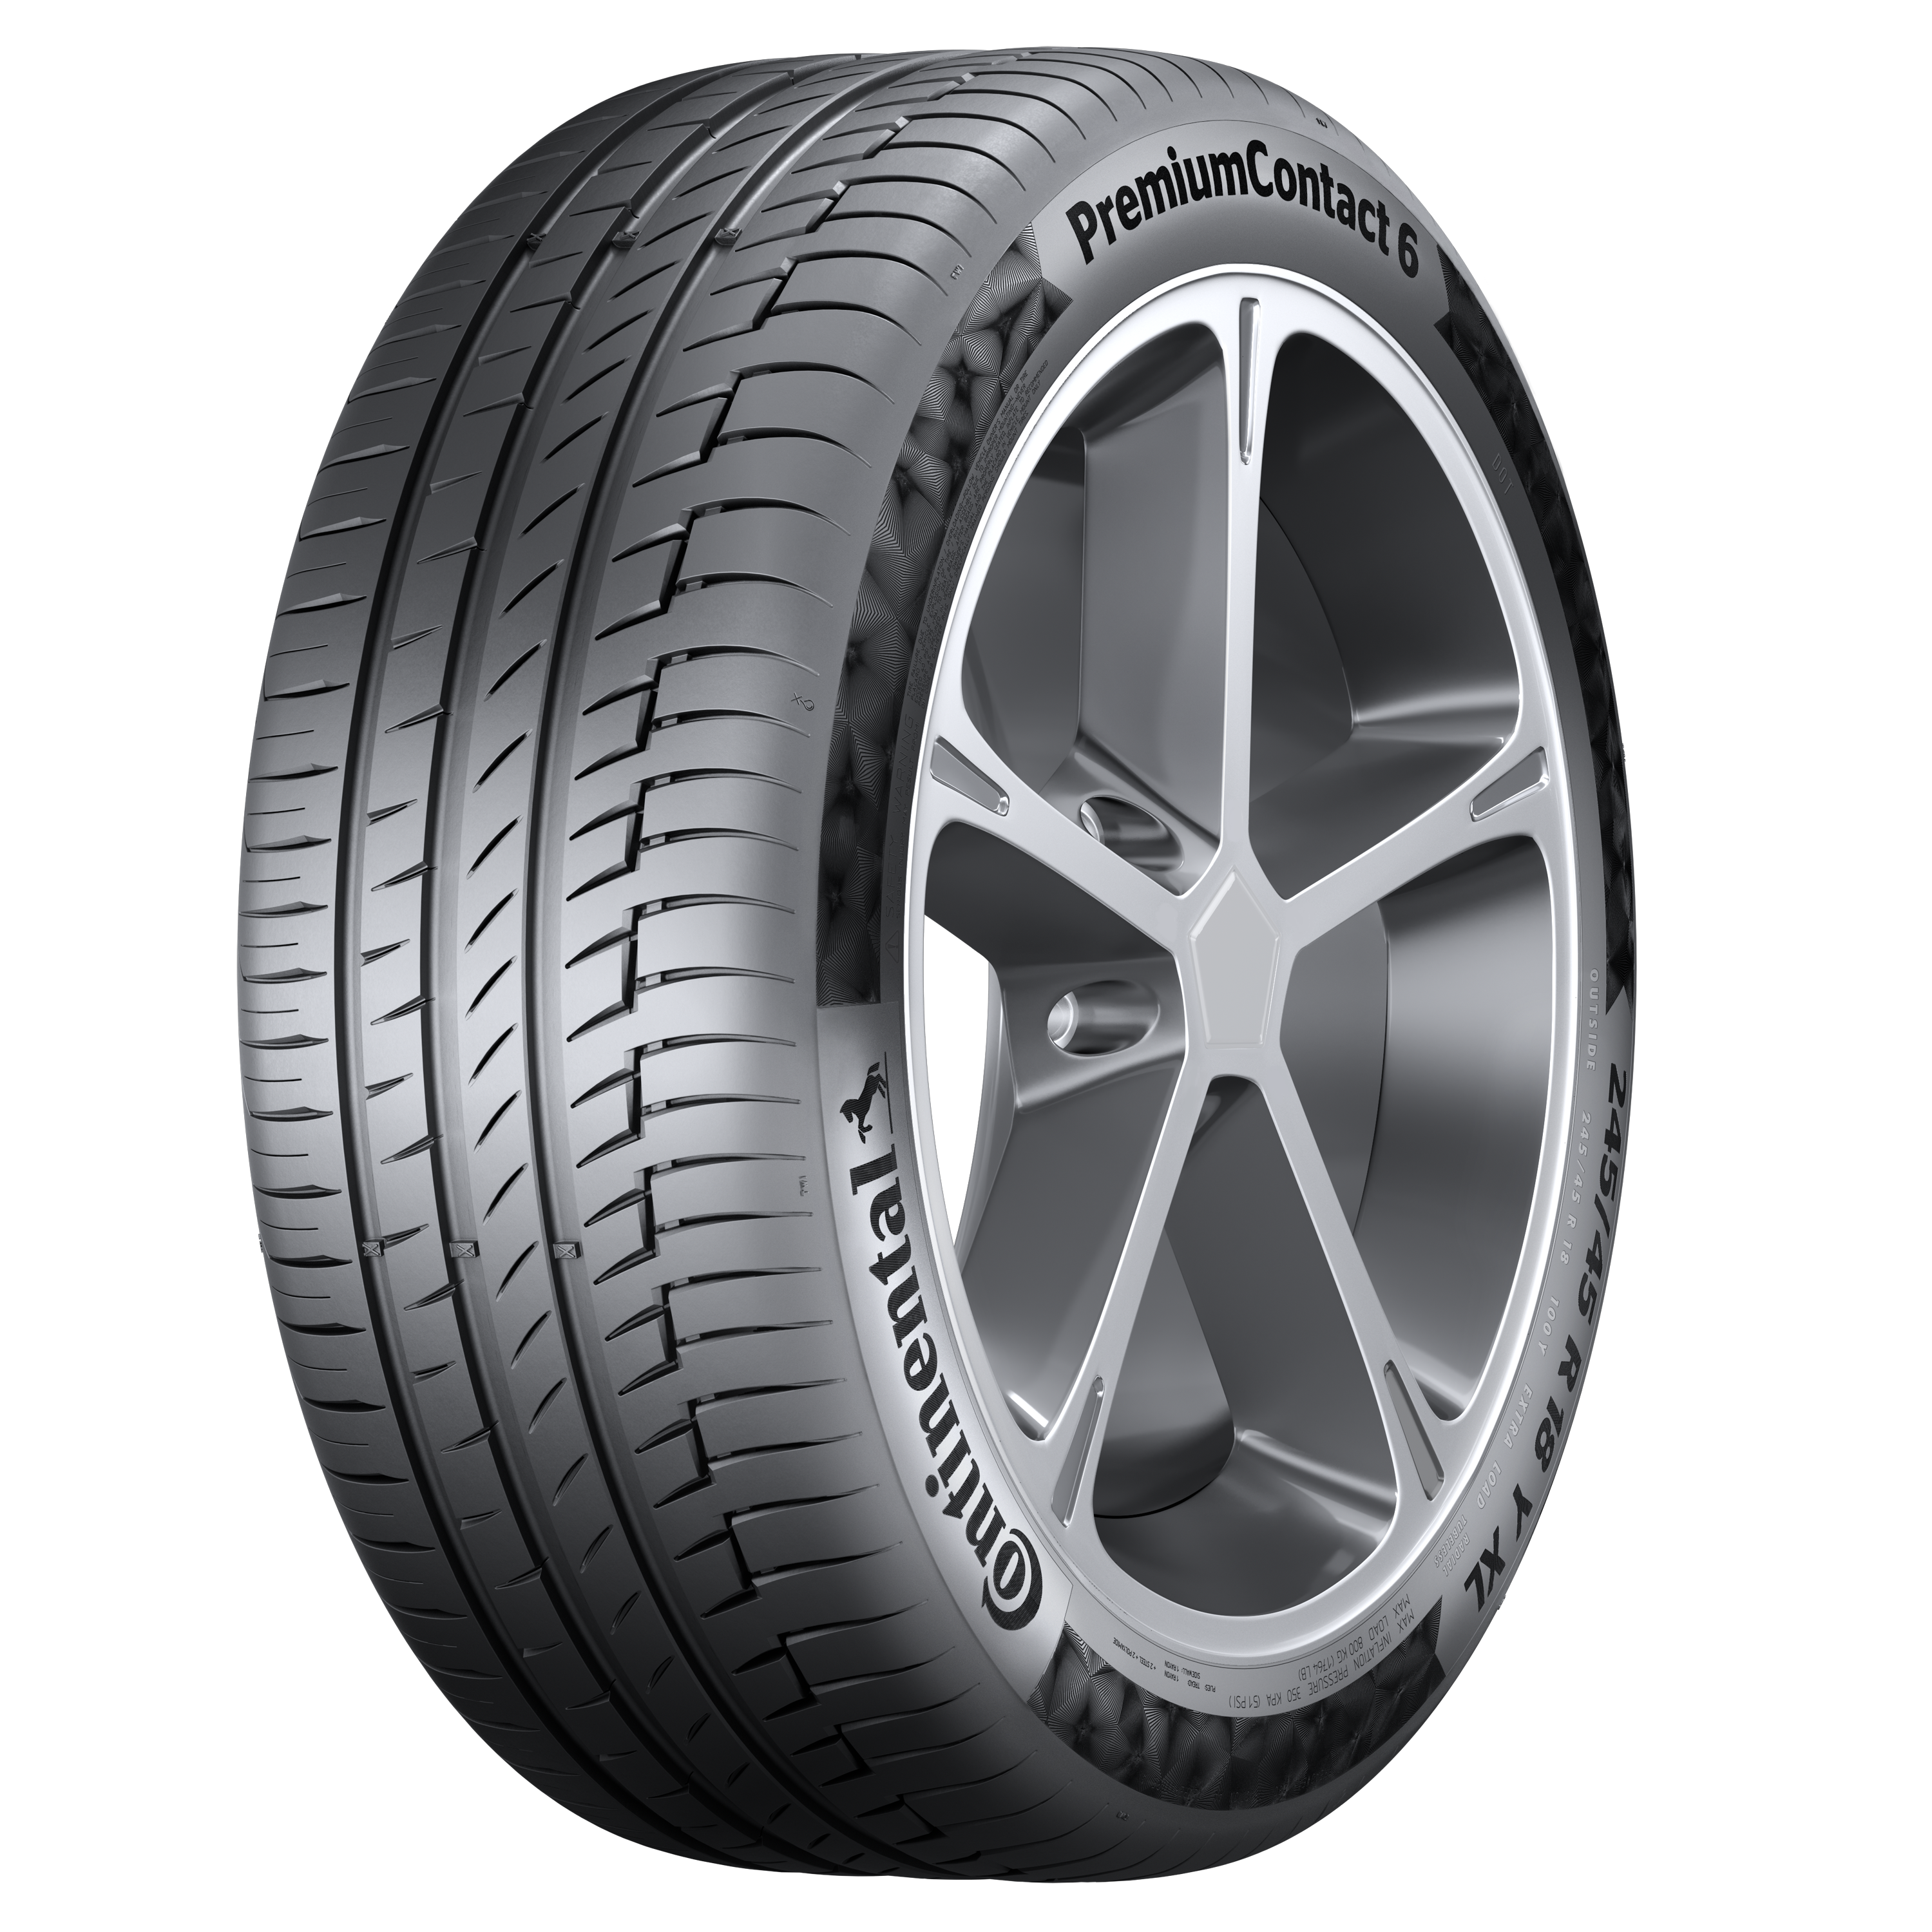 - car AG tires Continental Continental from Summer